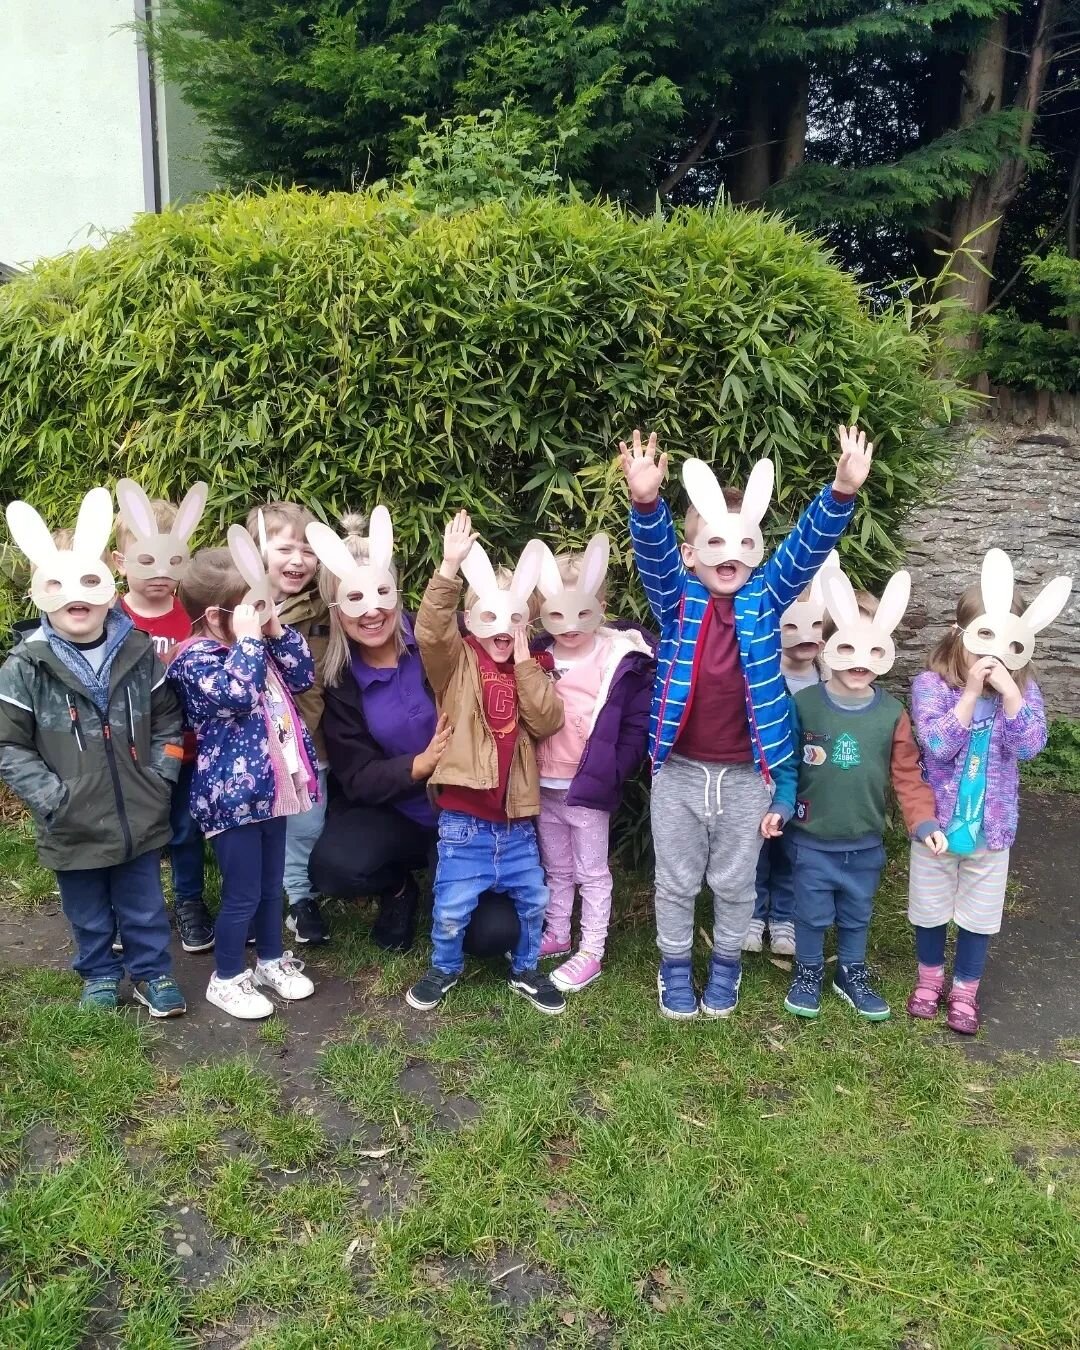 🐰🐥Happy Easter Everyone🐥🐰

The preschoolers were very egg-cited to see that the Easter bunny had been to nursery ! They explored the garden and each found a egg with a hidden treat inside 🥚🐰🐥 

#happyeaster #easteregghunt #spring #preschoolact